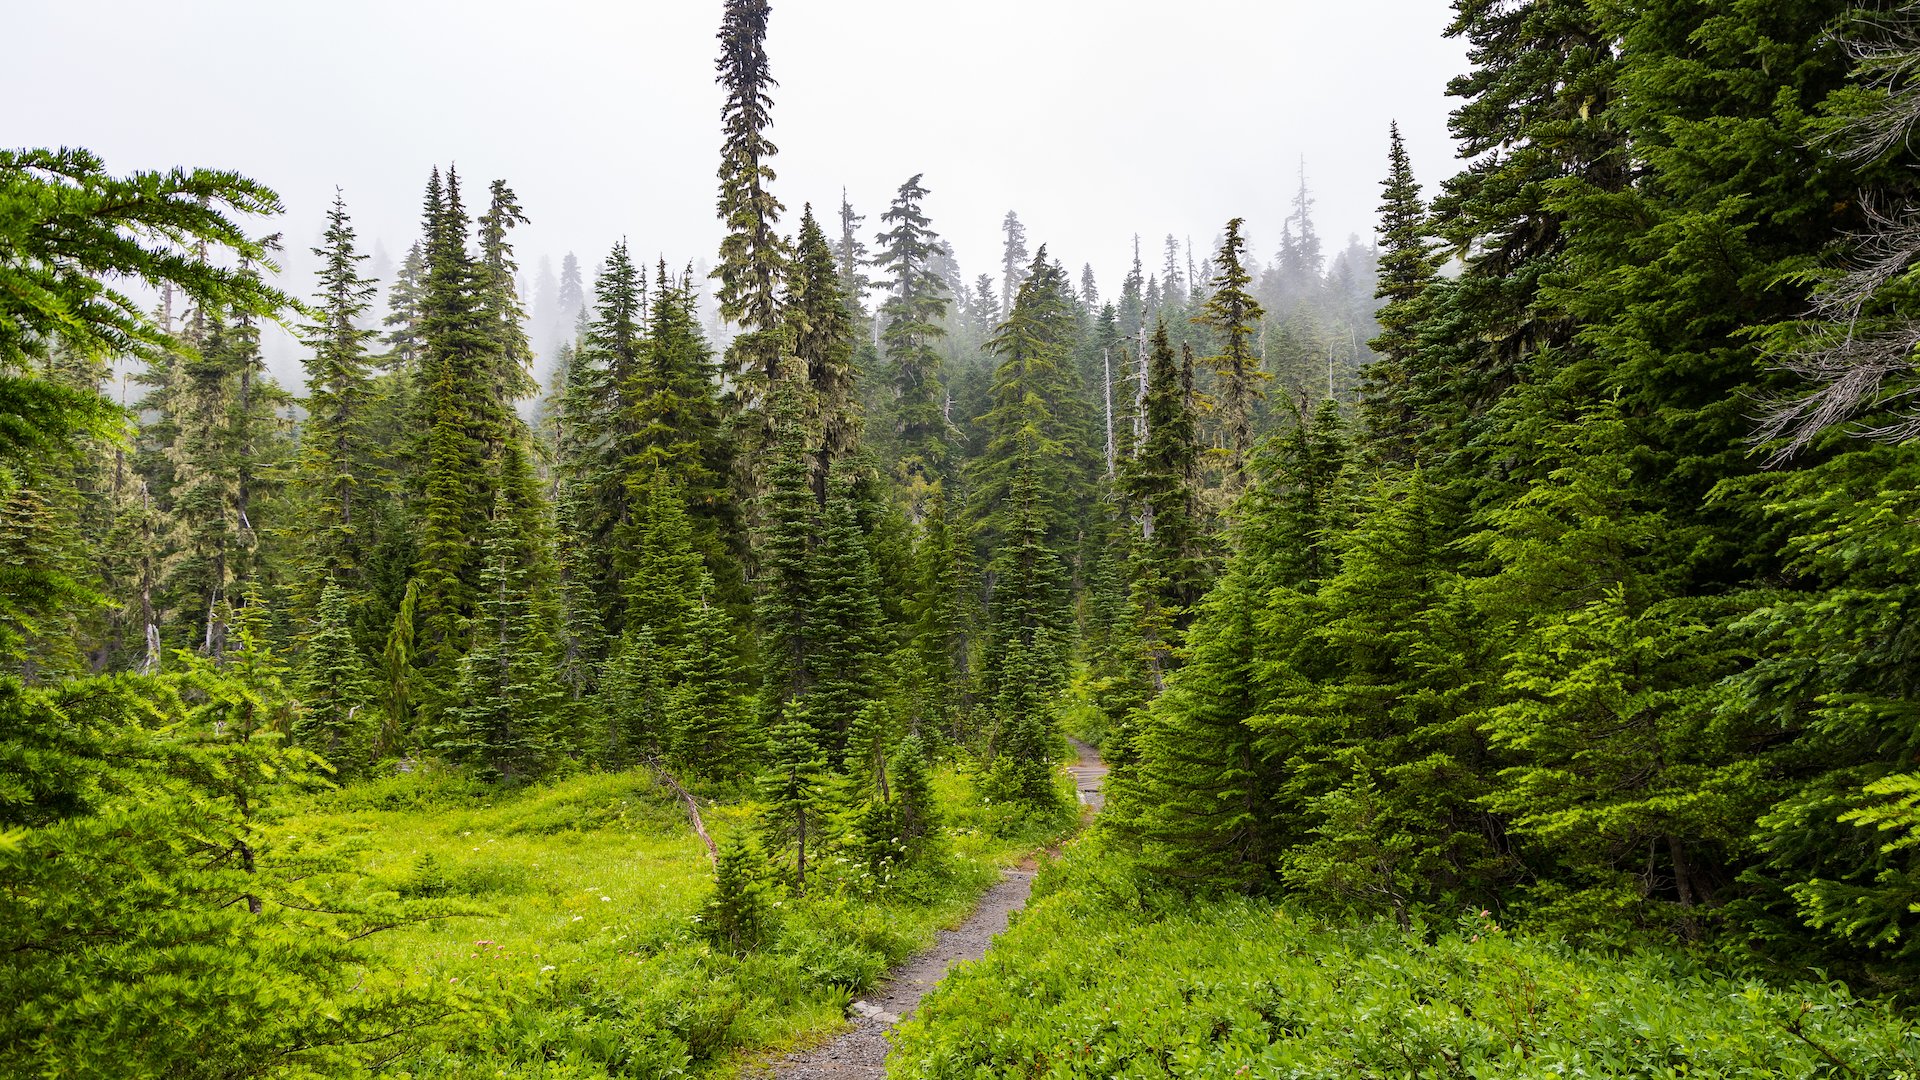  The trail disappears into the lush forest of the valley floor. 